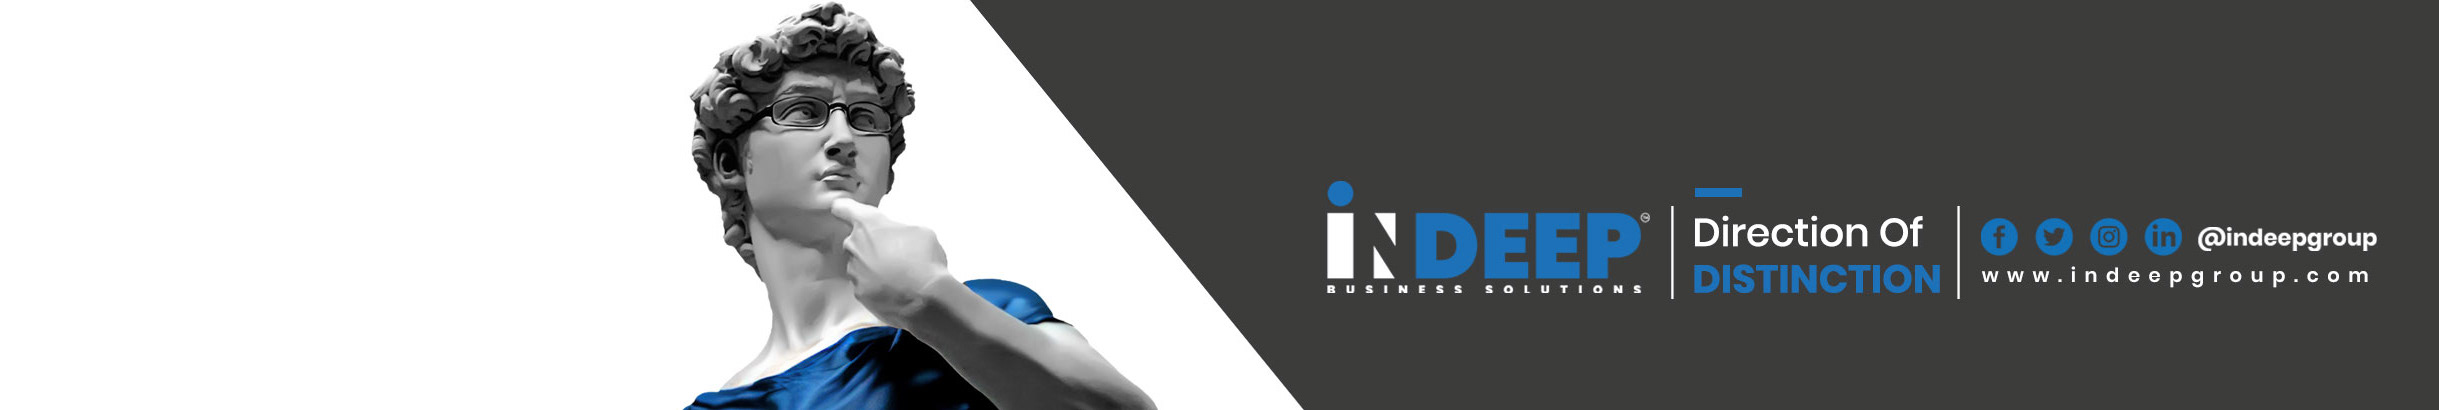 INDEEP ™'s profile banner